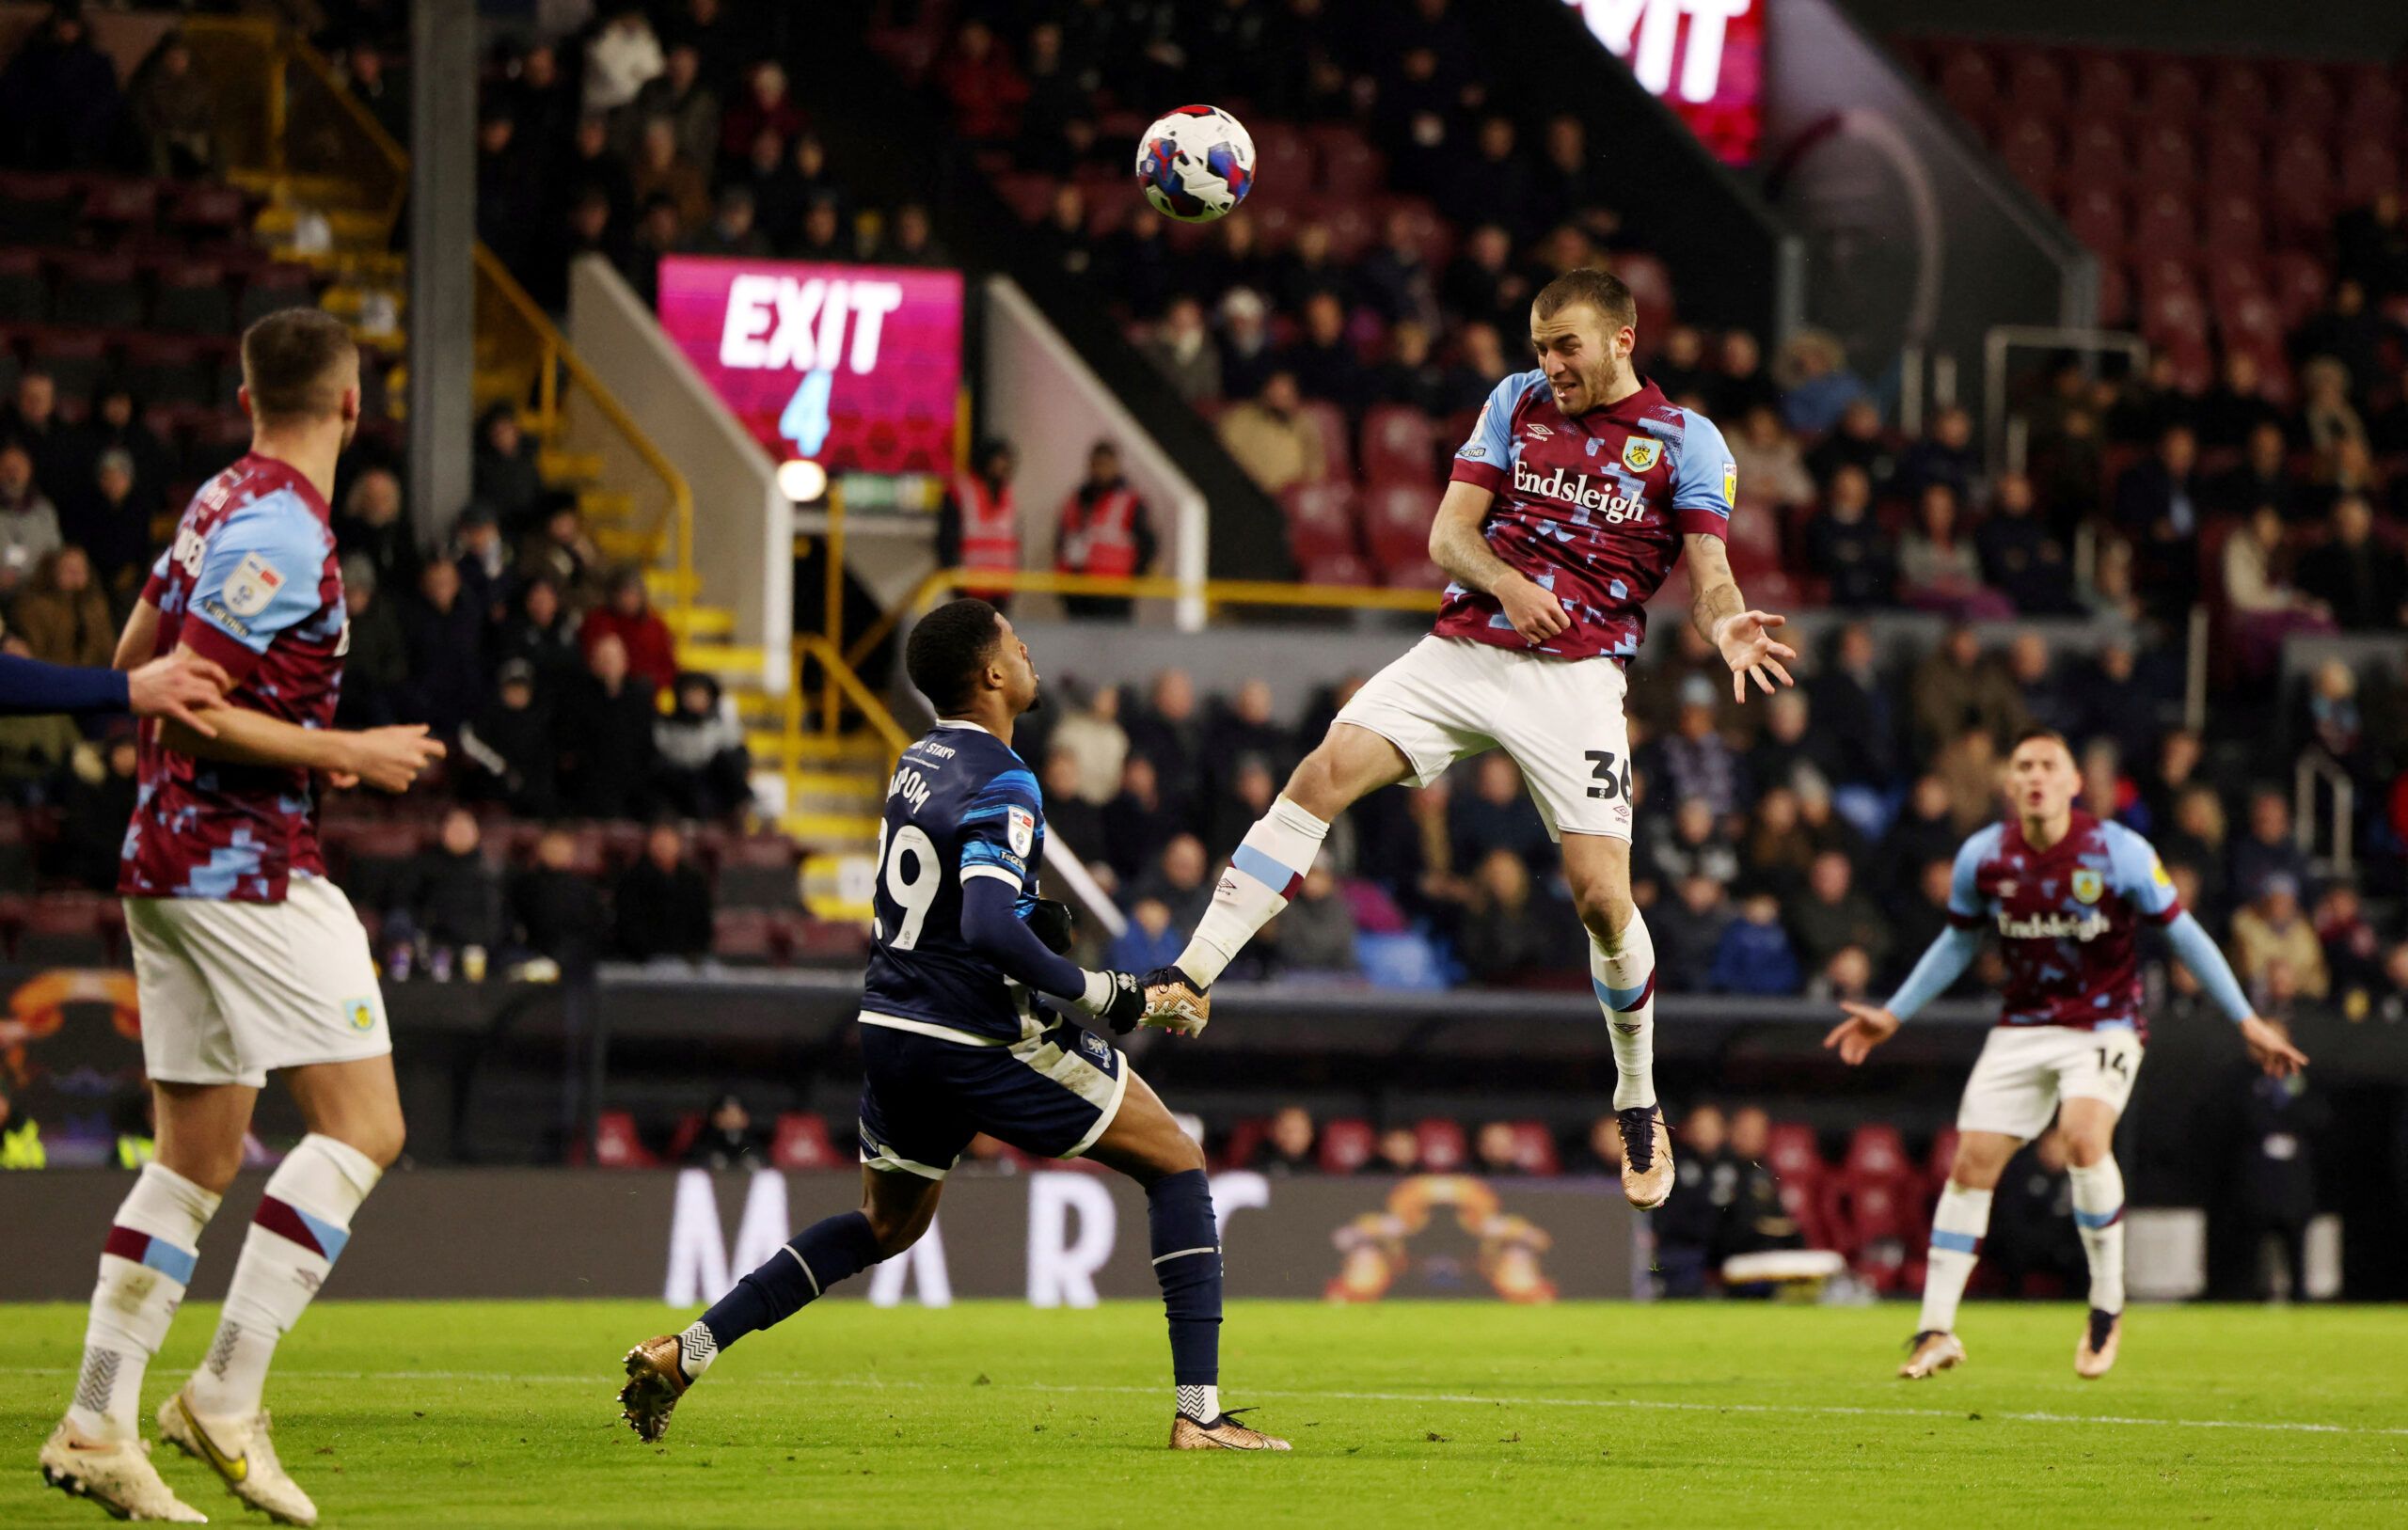 Soccer Football - Championship - Burnley v Middlesbrough - Turf Moor, Burnley, Britain - December 17, 2022 Burnley's Jordan Beyer heads at goal Action Images/John Clifton  EDITORIAL USE ONLY. No use with unauthorized audio, video, data, fixture lists, club/league logos or 